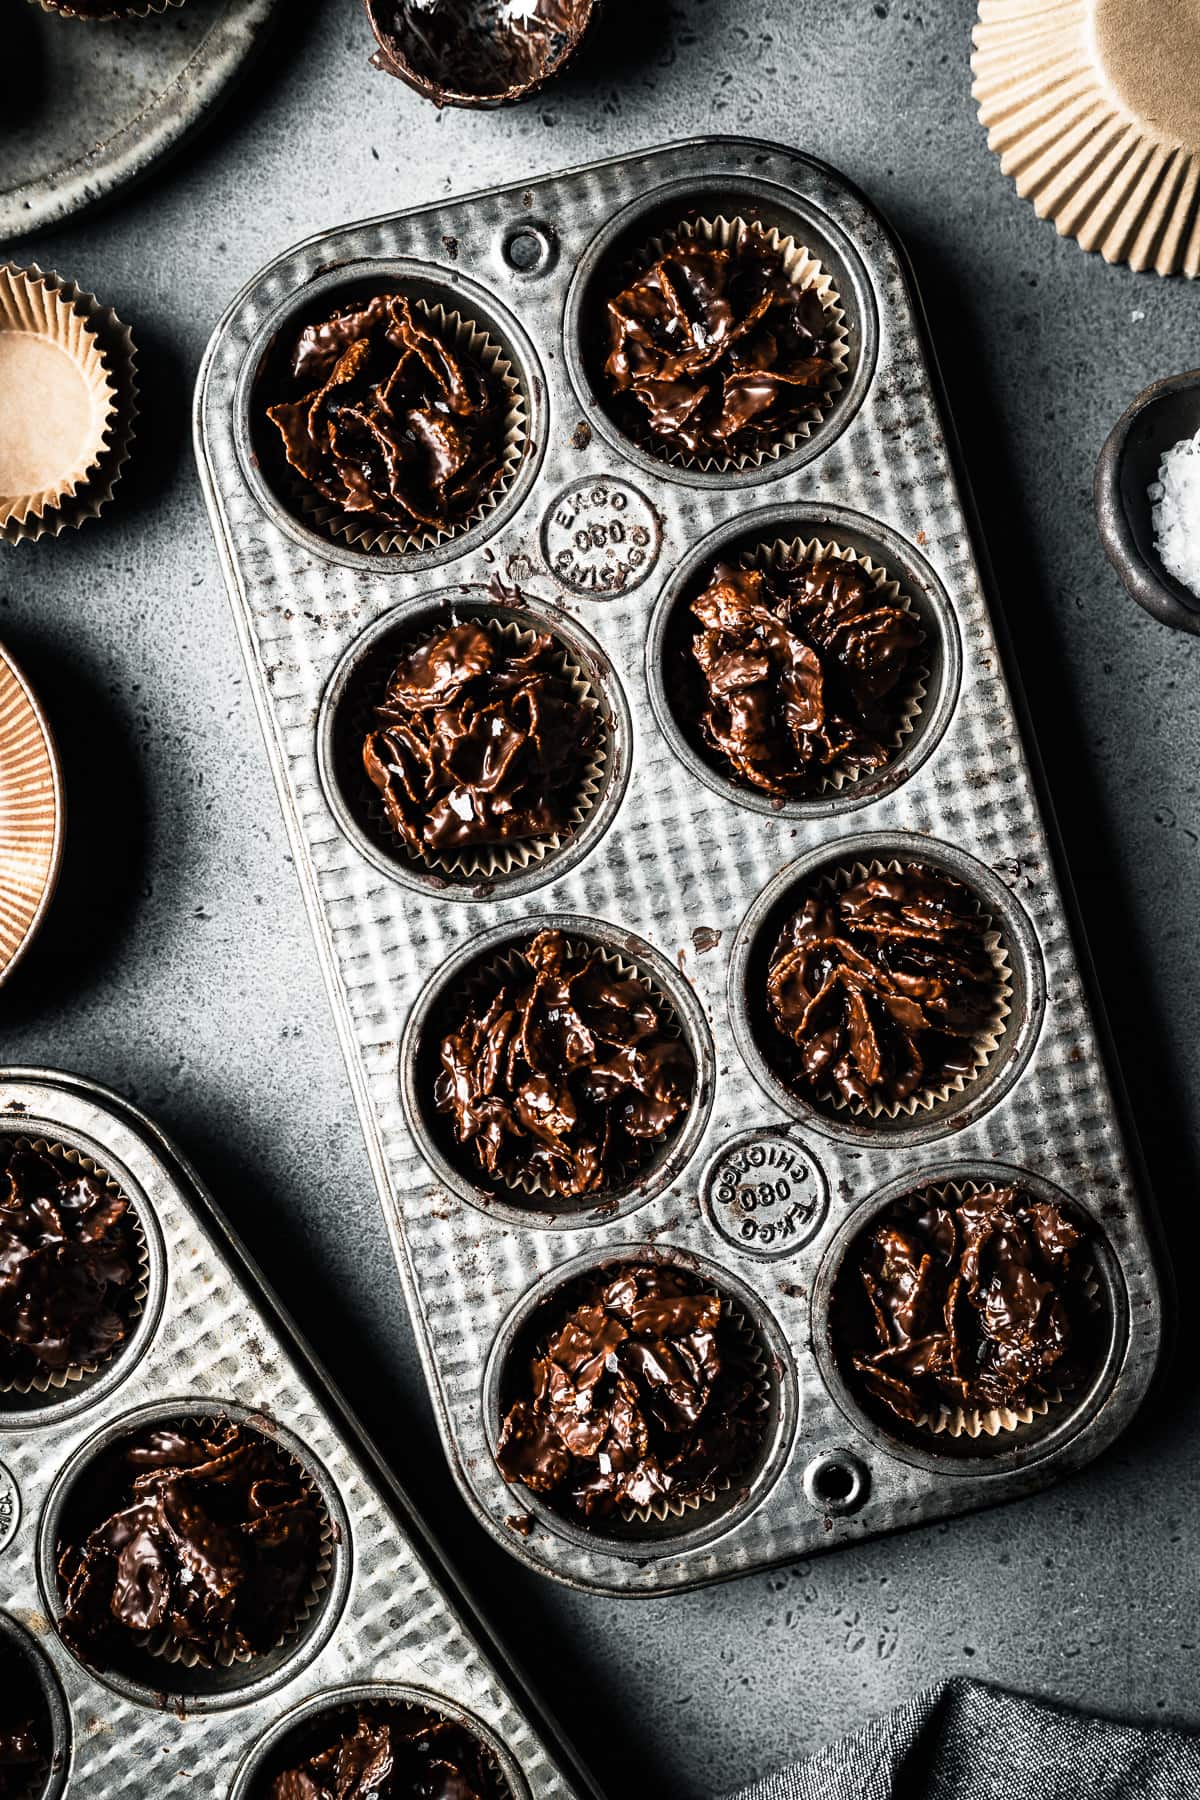 Two vintage mini muffin tins hold chocolate covered cornflake cereal, called roses de sables. They rest on a grey stone surface and are surrounded by brown bowls, brown paper muffin liners and a pinch bowl of flaky sea salt.